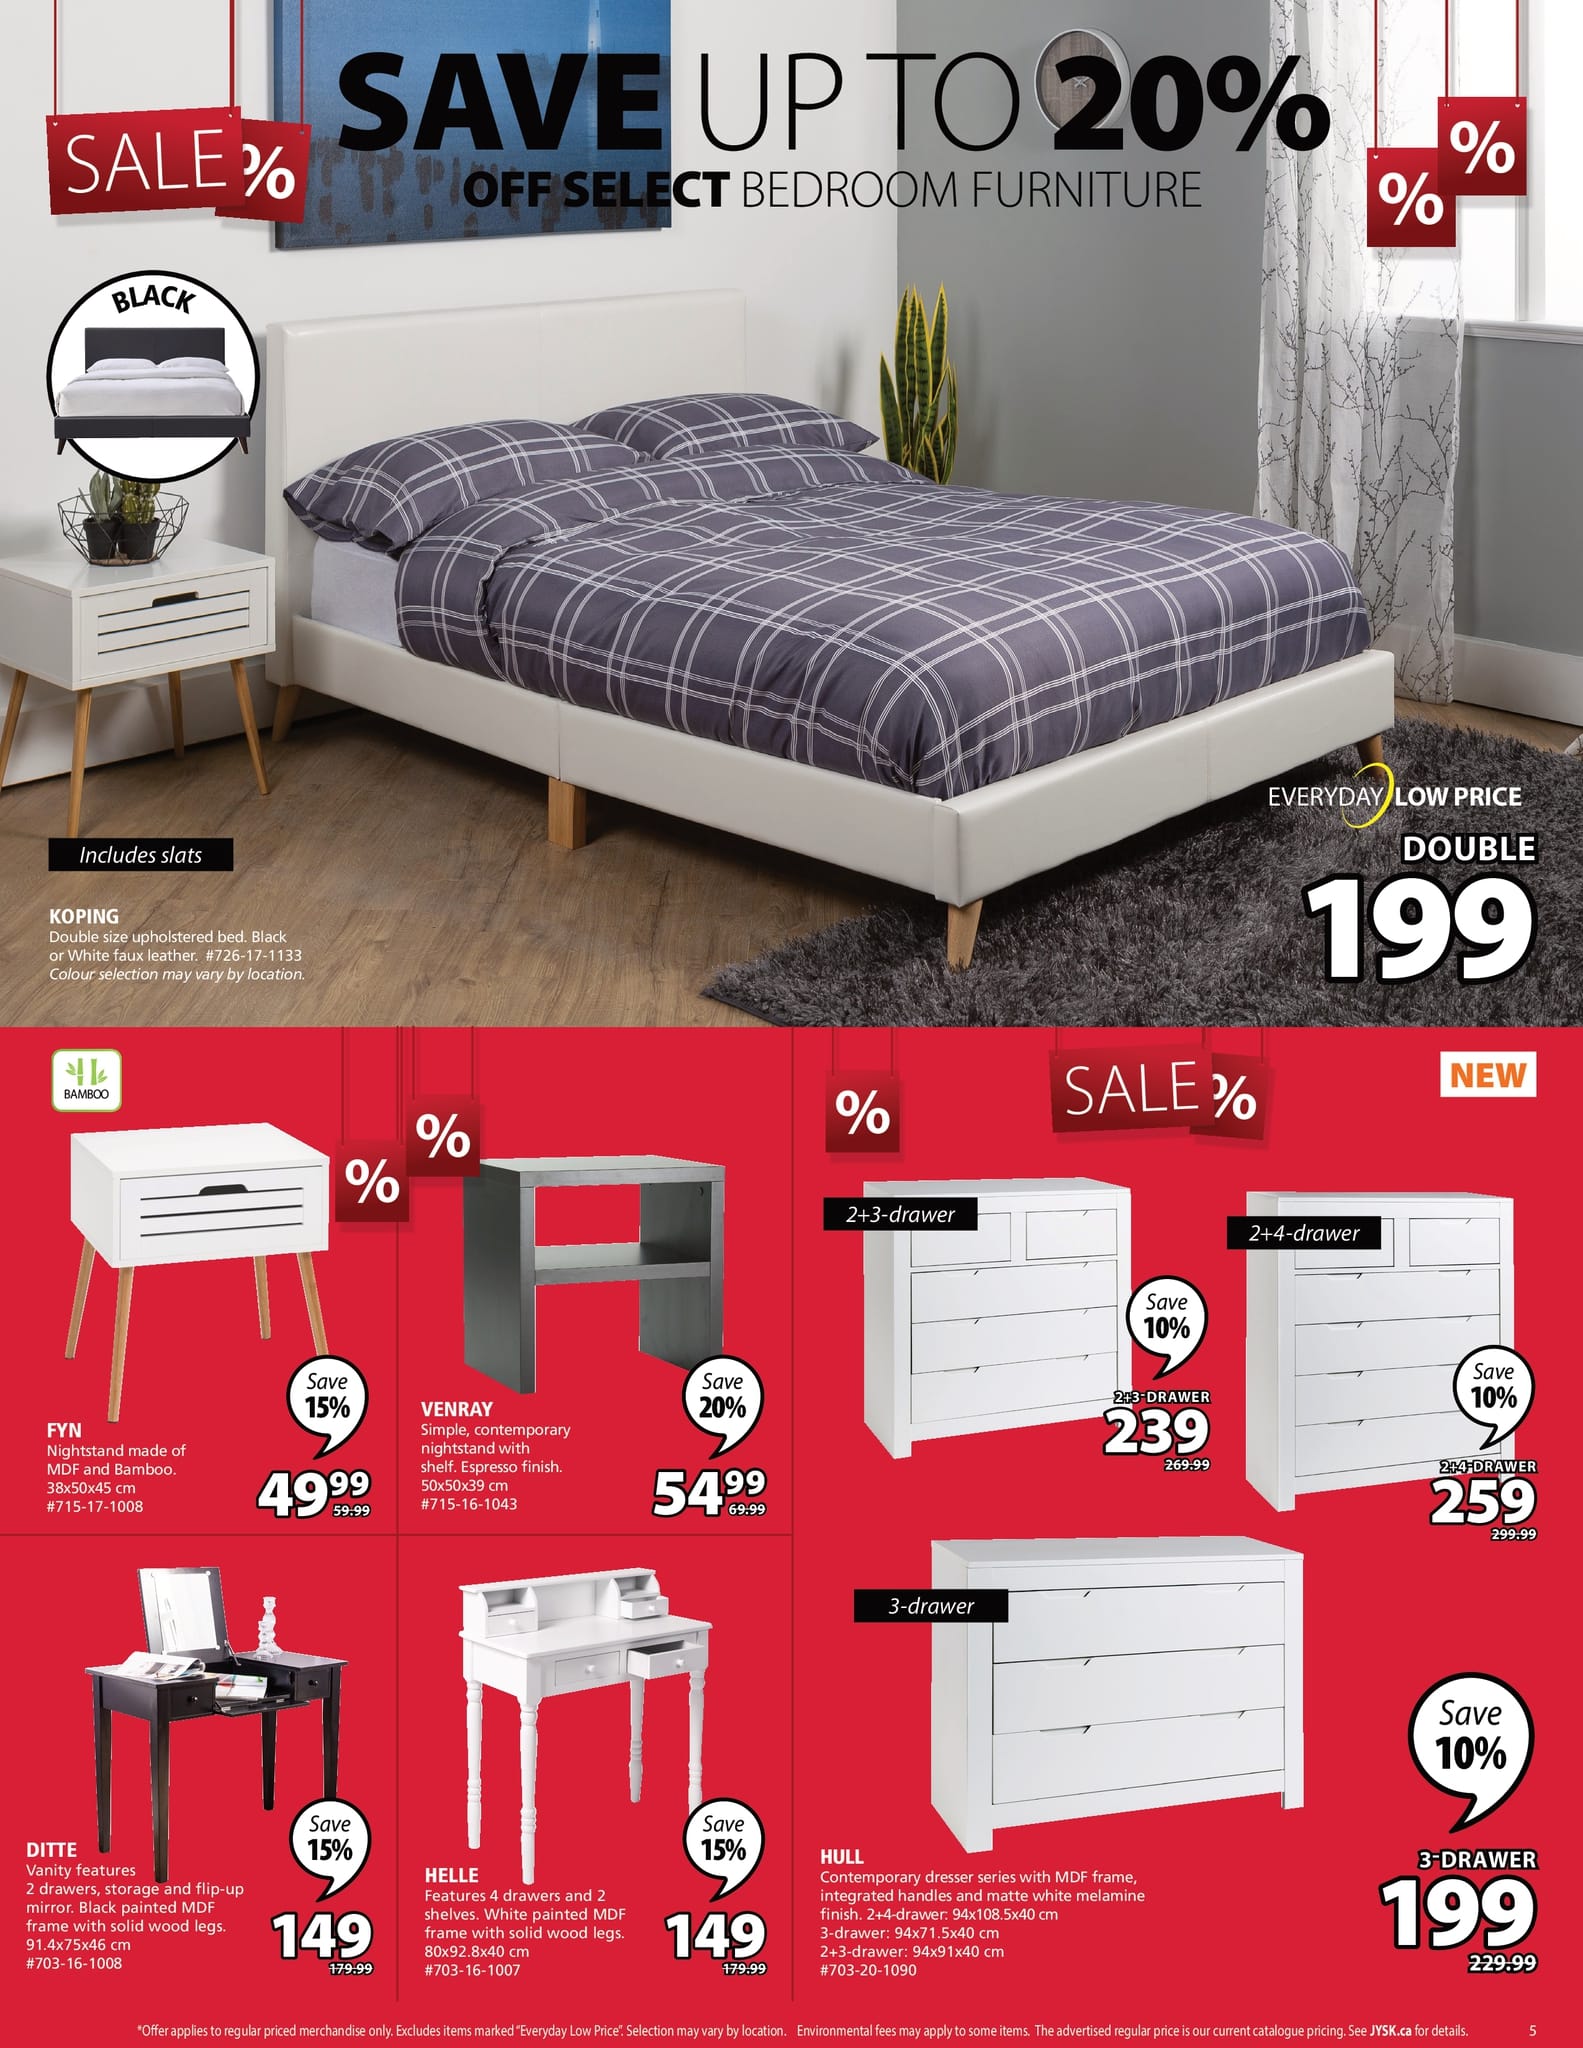 Jysk - Weekly Flyer Specials - Page 5